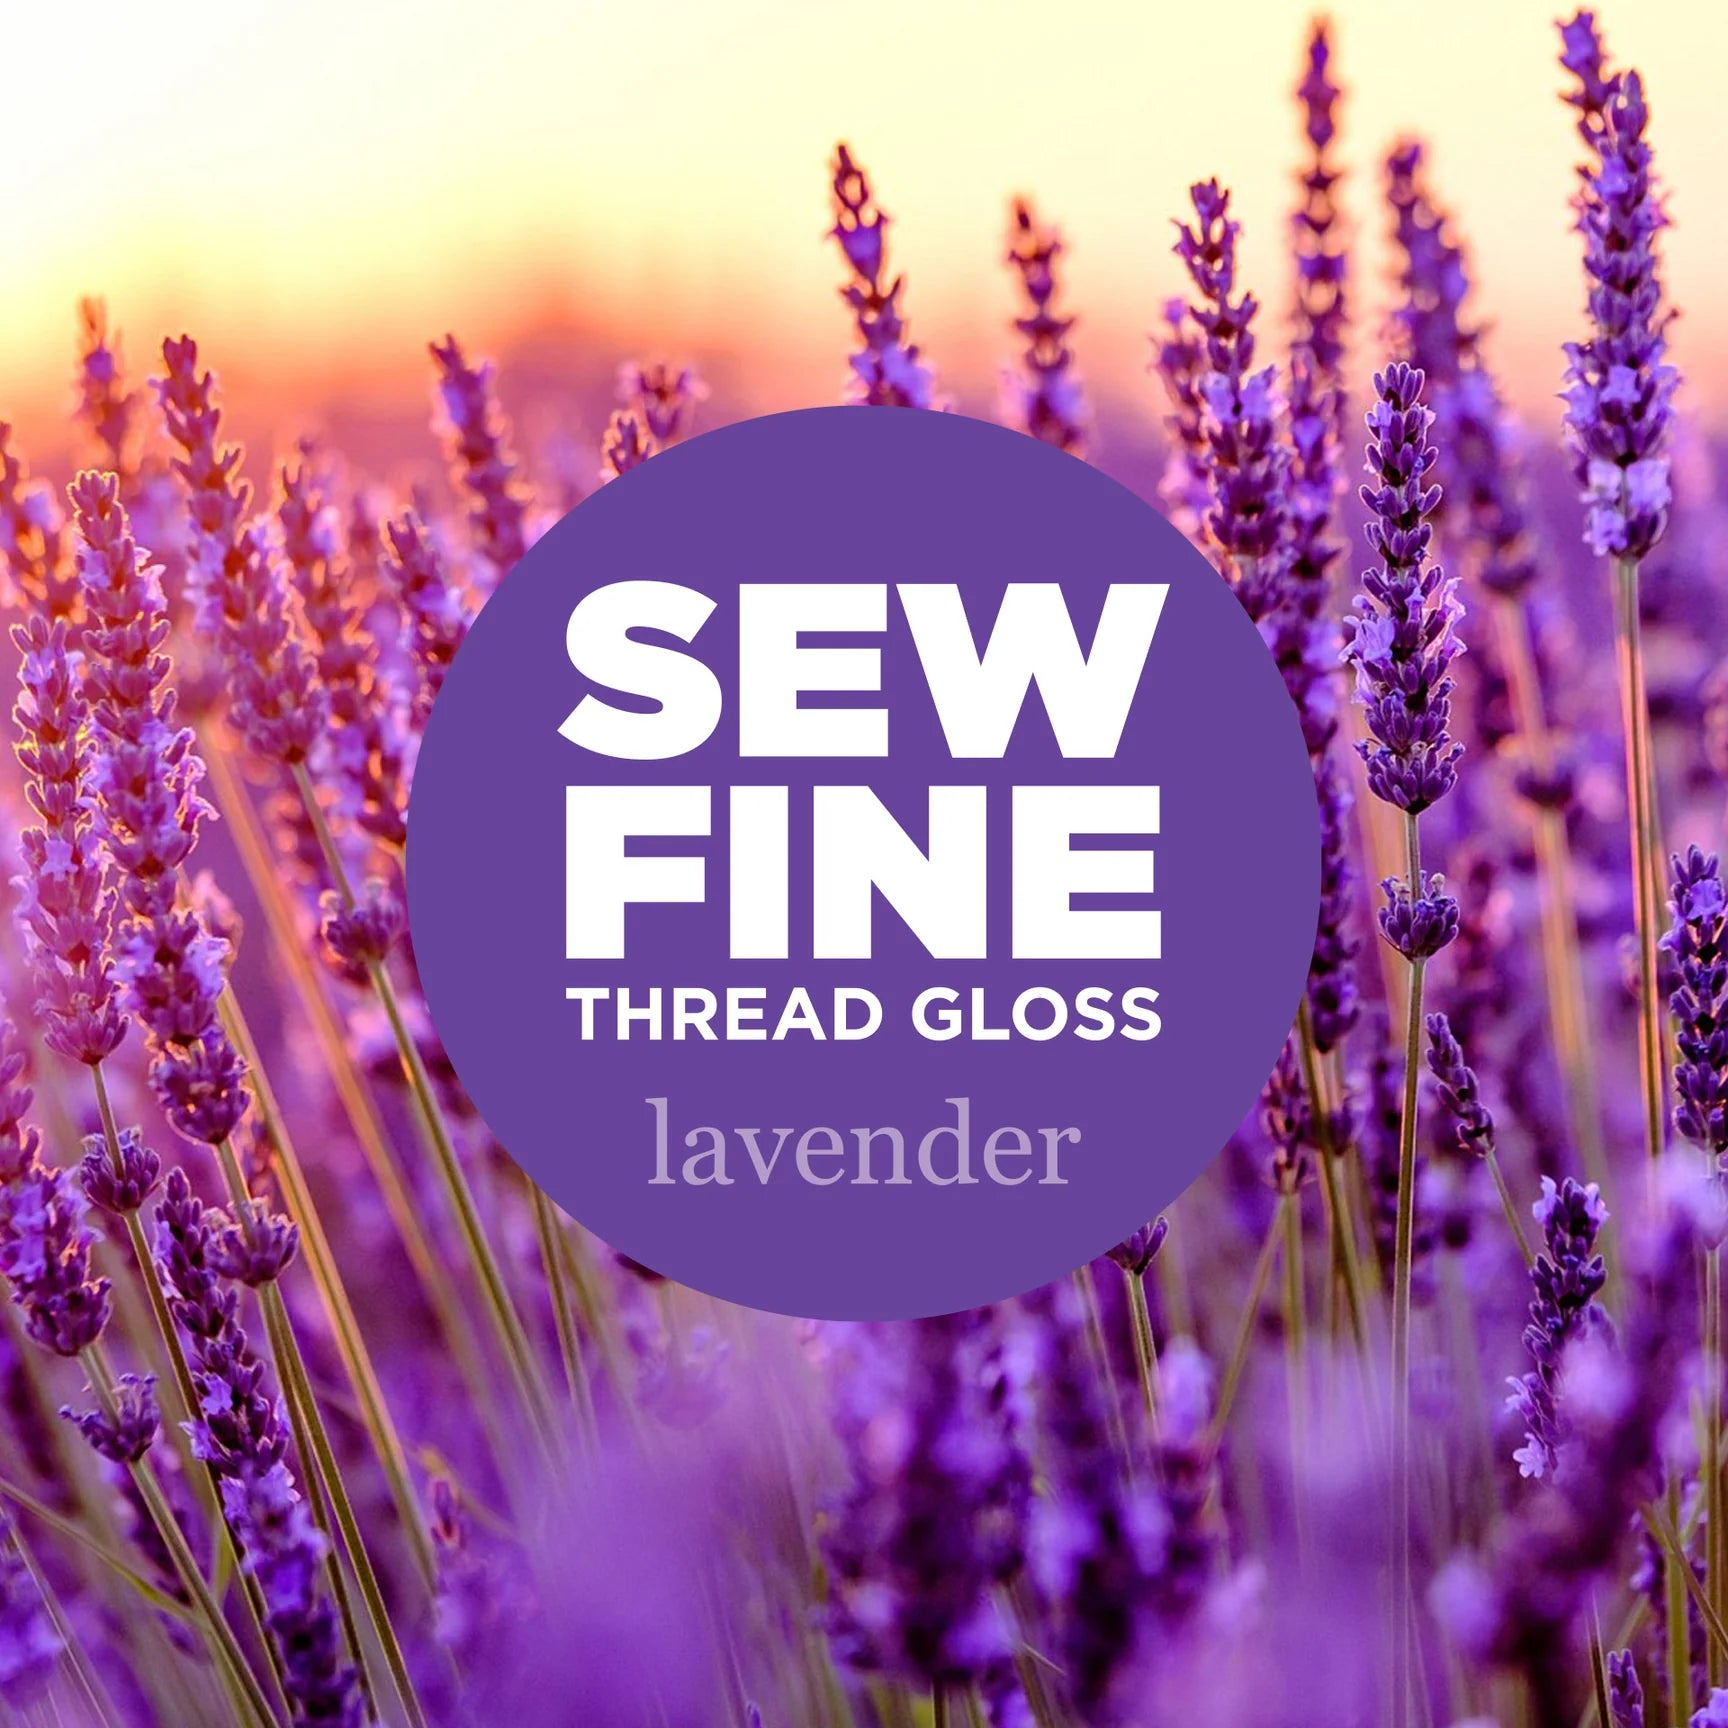 0.5oz pot of "Lavender" Sew Fine Thread Gloss. A true, light floral lavender fragrance, like you're walking through a lavender field at sunset. 